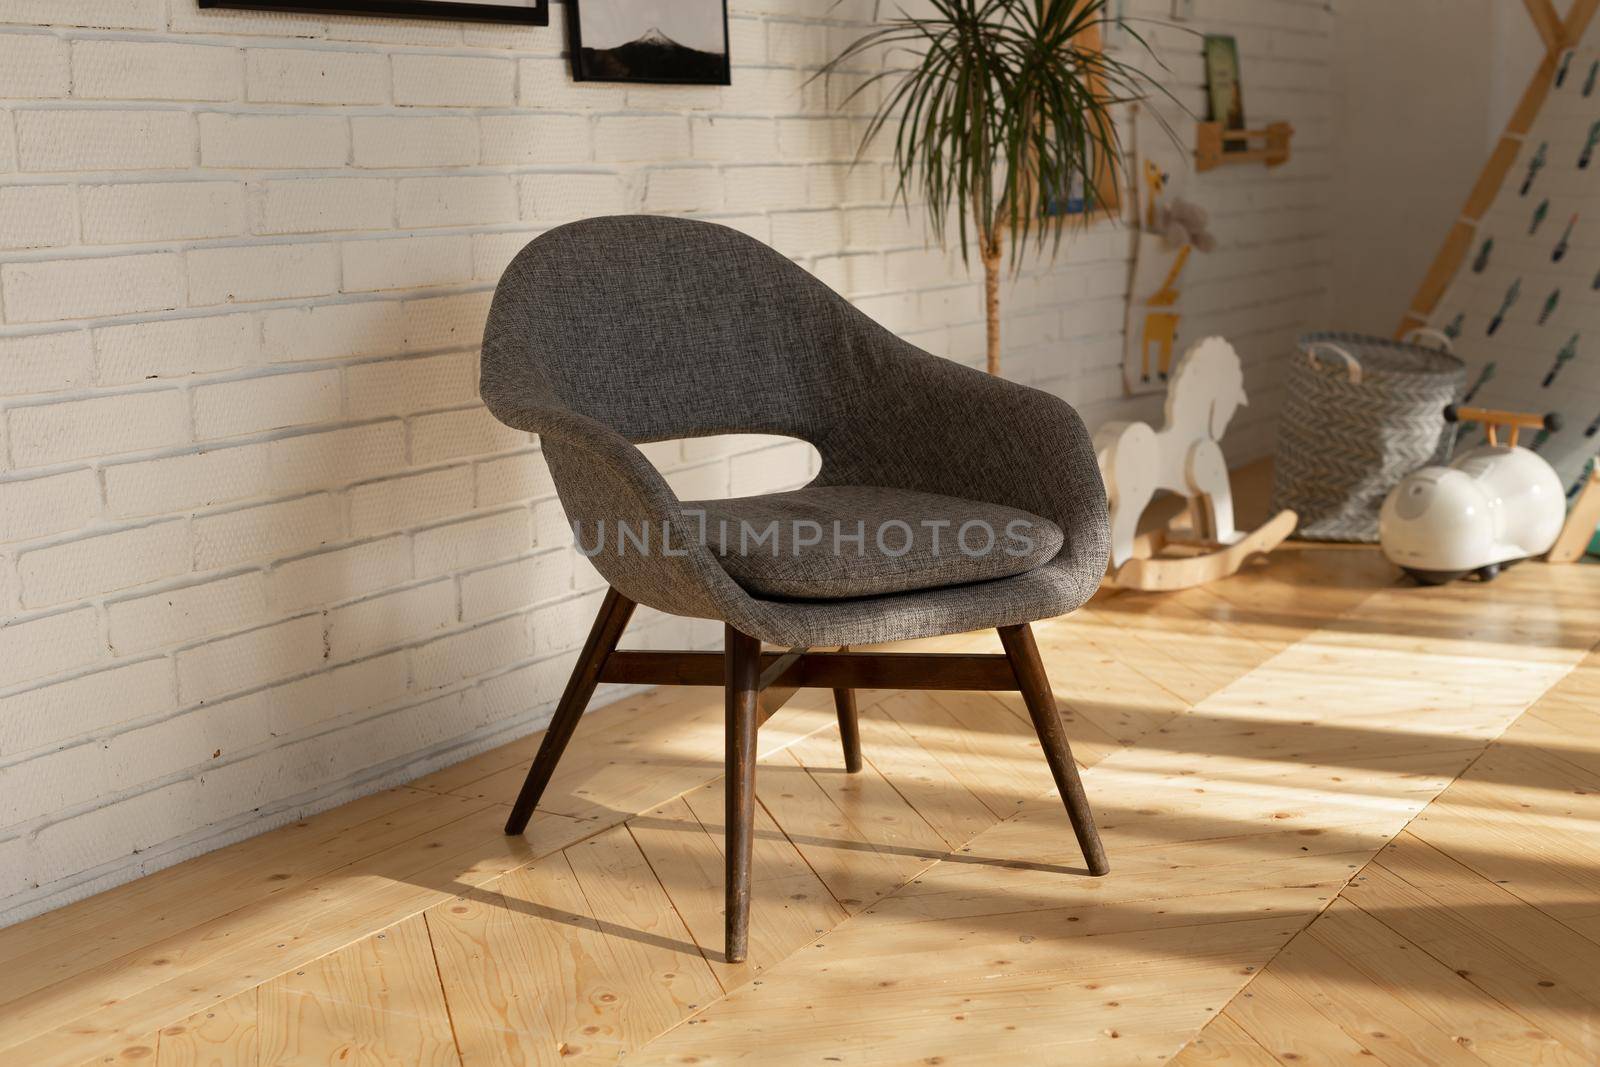 Cozy grey armchair and green plant in pot. Interior and furniture concept